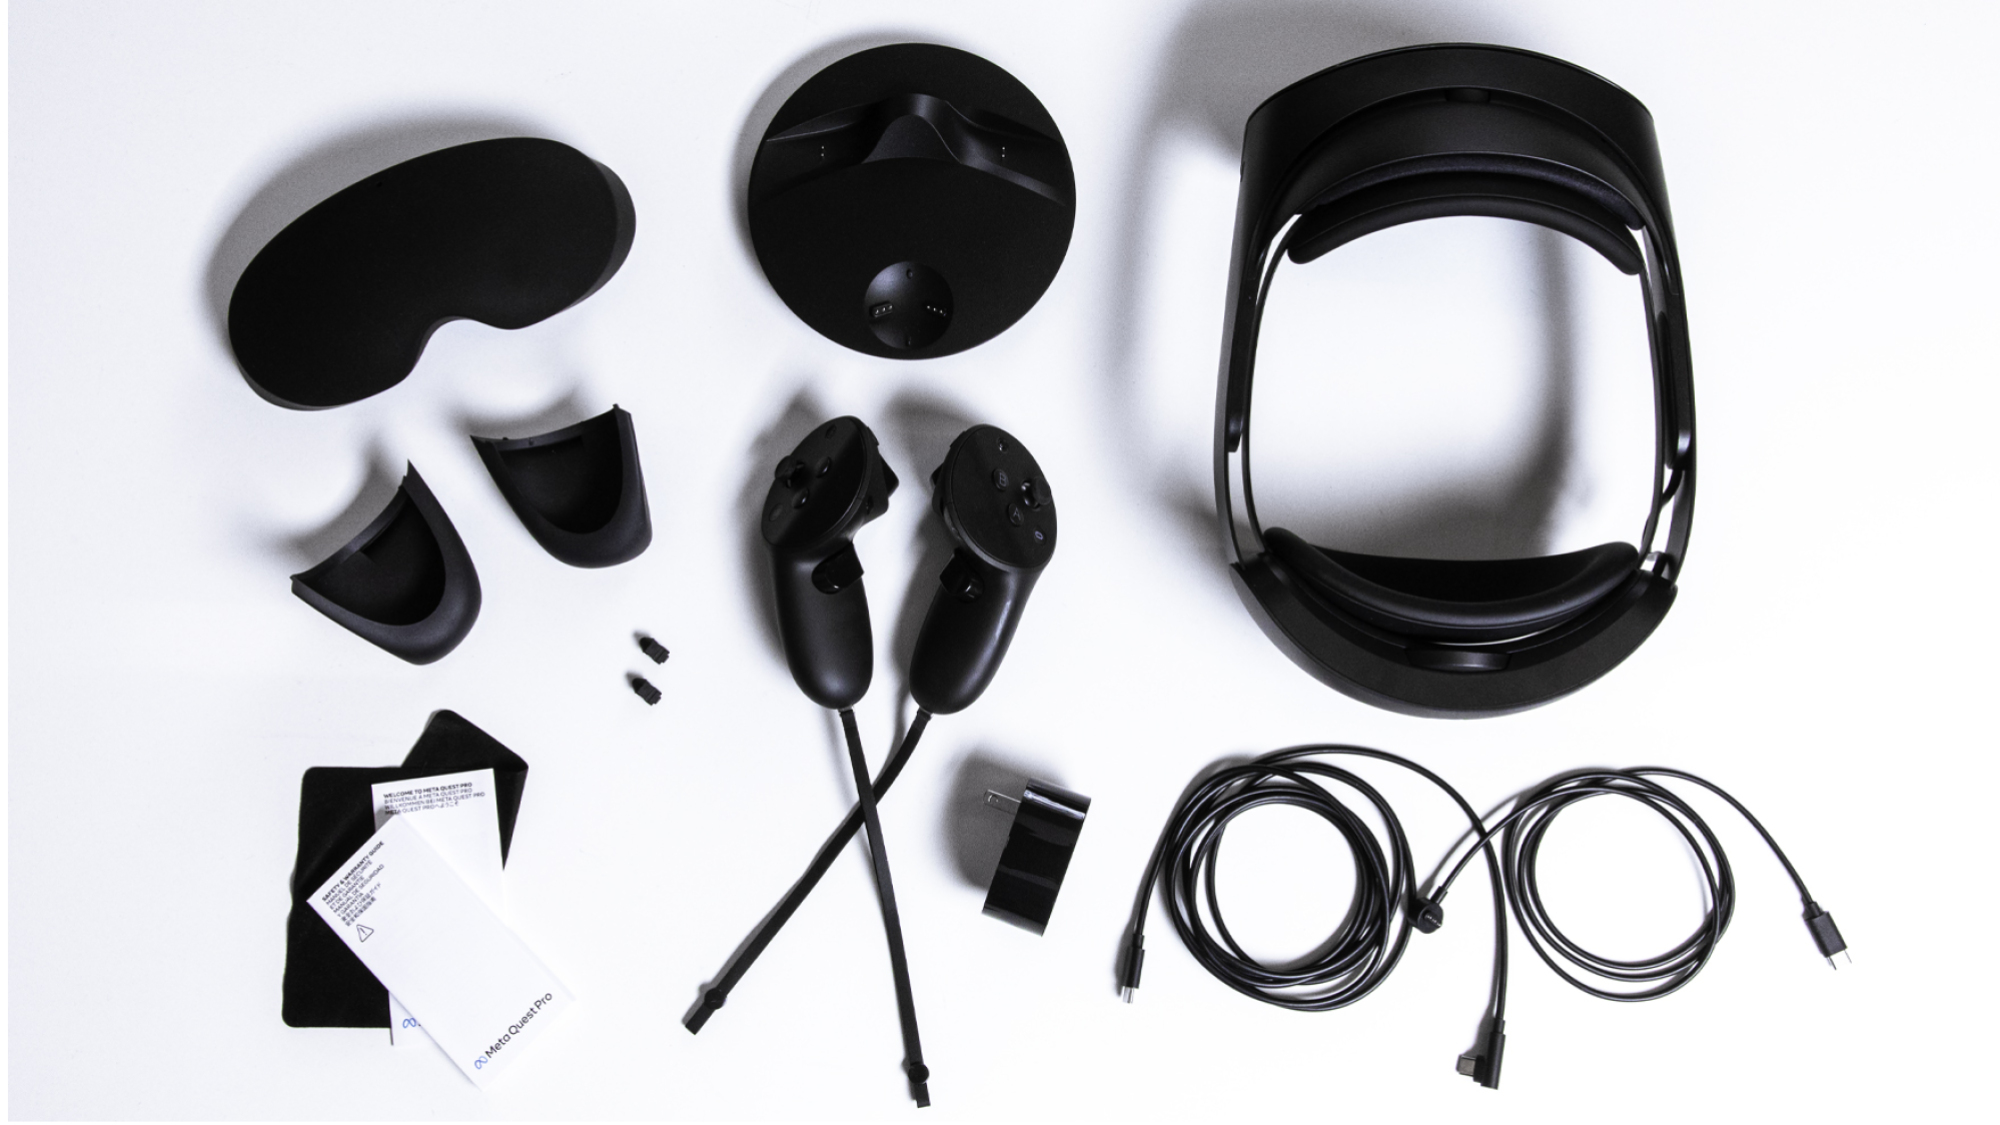 A flat lay of the Quest Pro's accessories: a protective rubber cover for the headset's glass panel, a charging doc, cords, and wall charger, two controllers, magnetic gaskets, two stylus tips, a glass cleaning cloth, and a small manual.